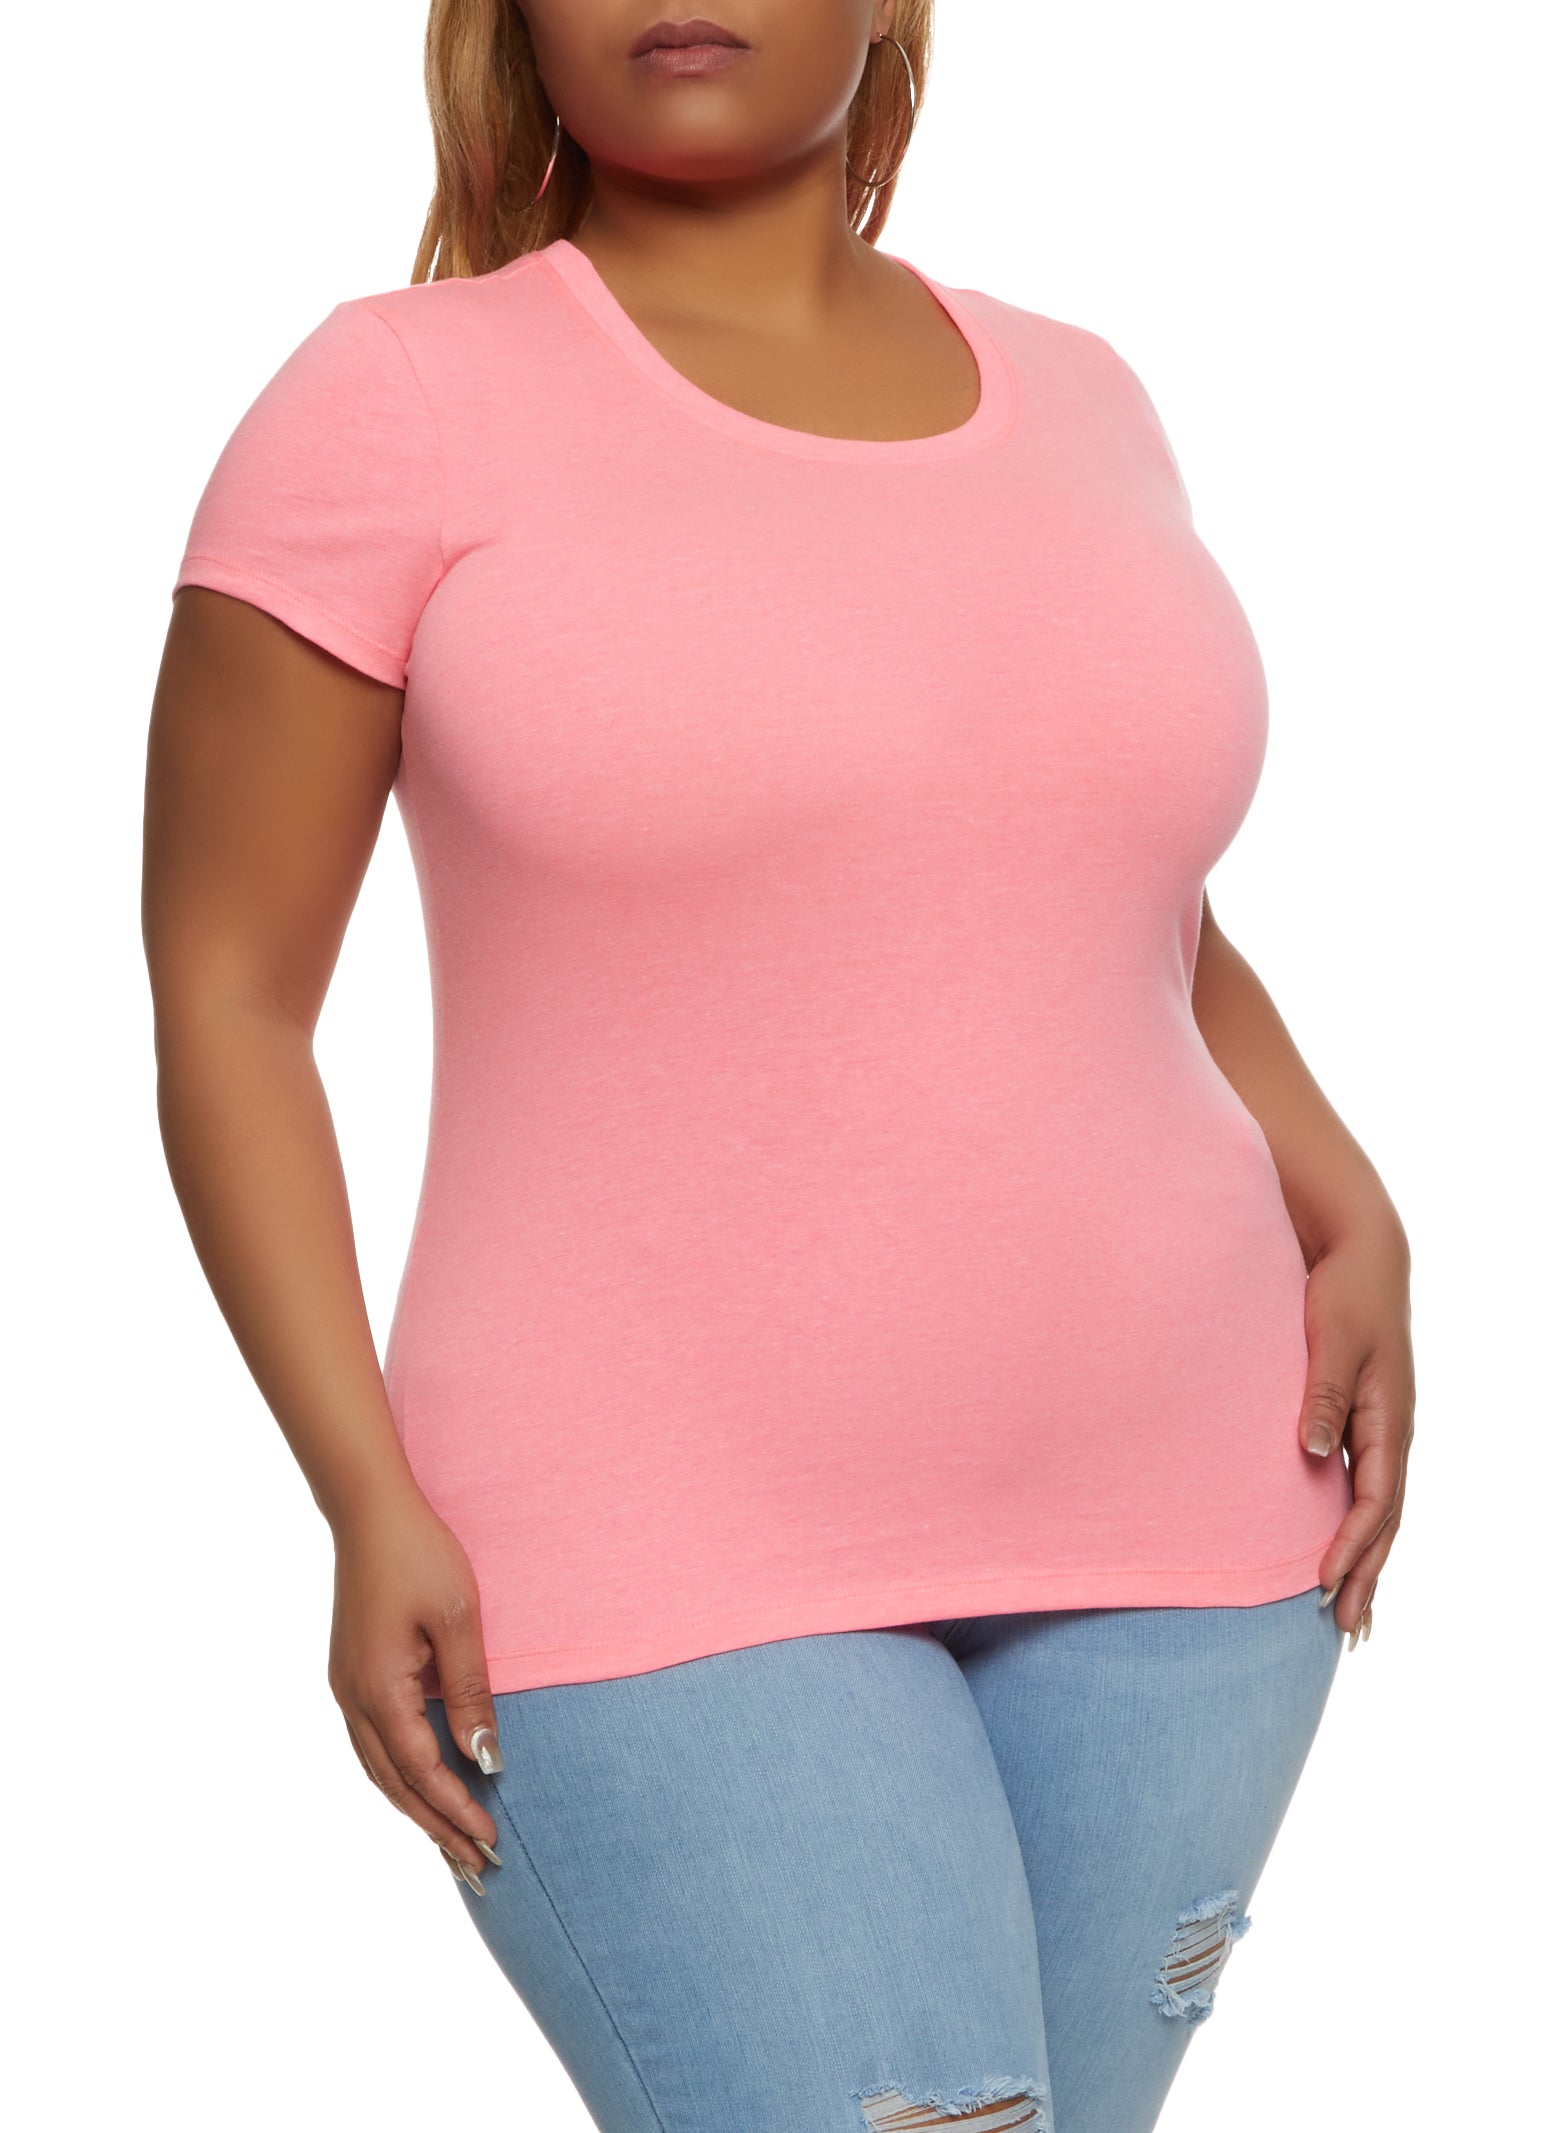 Plus Size T Shirts, Everyday Low Prices